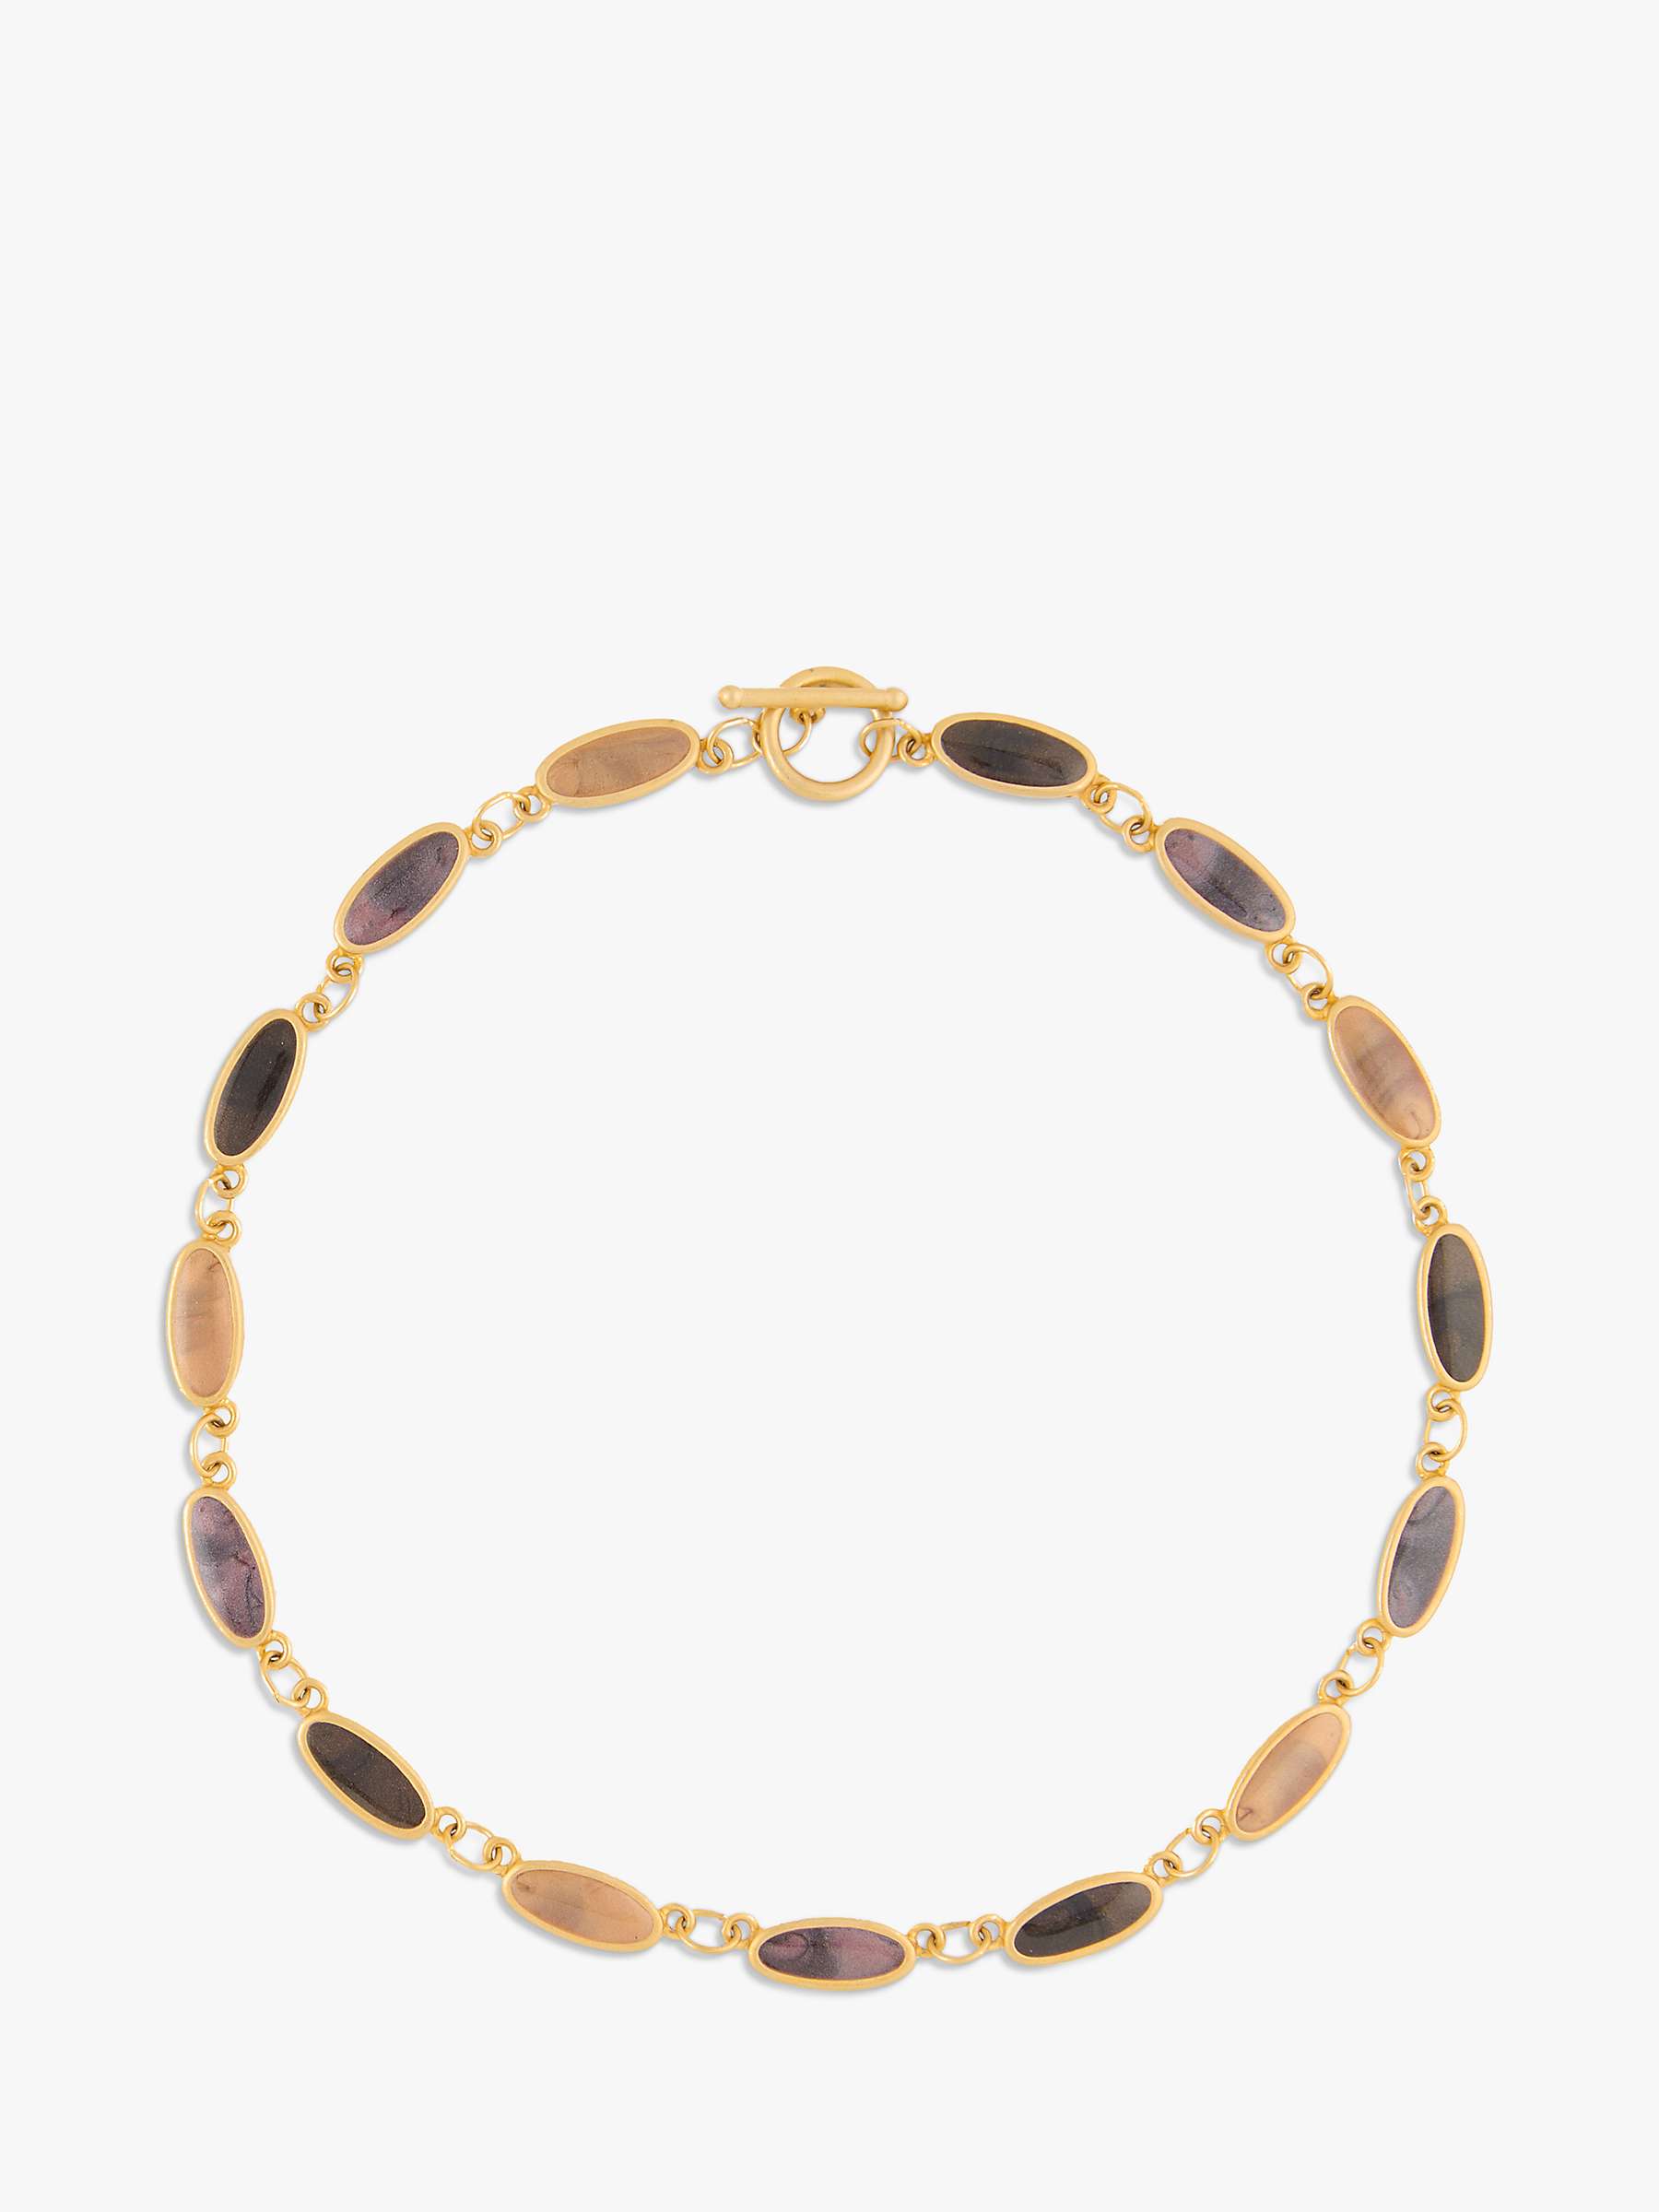 Buy Susan Caplan Shaded Topaz Oval Stone Necklace, Gold Online at johnlewis.com